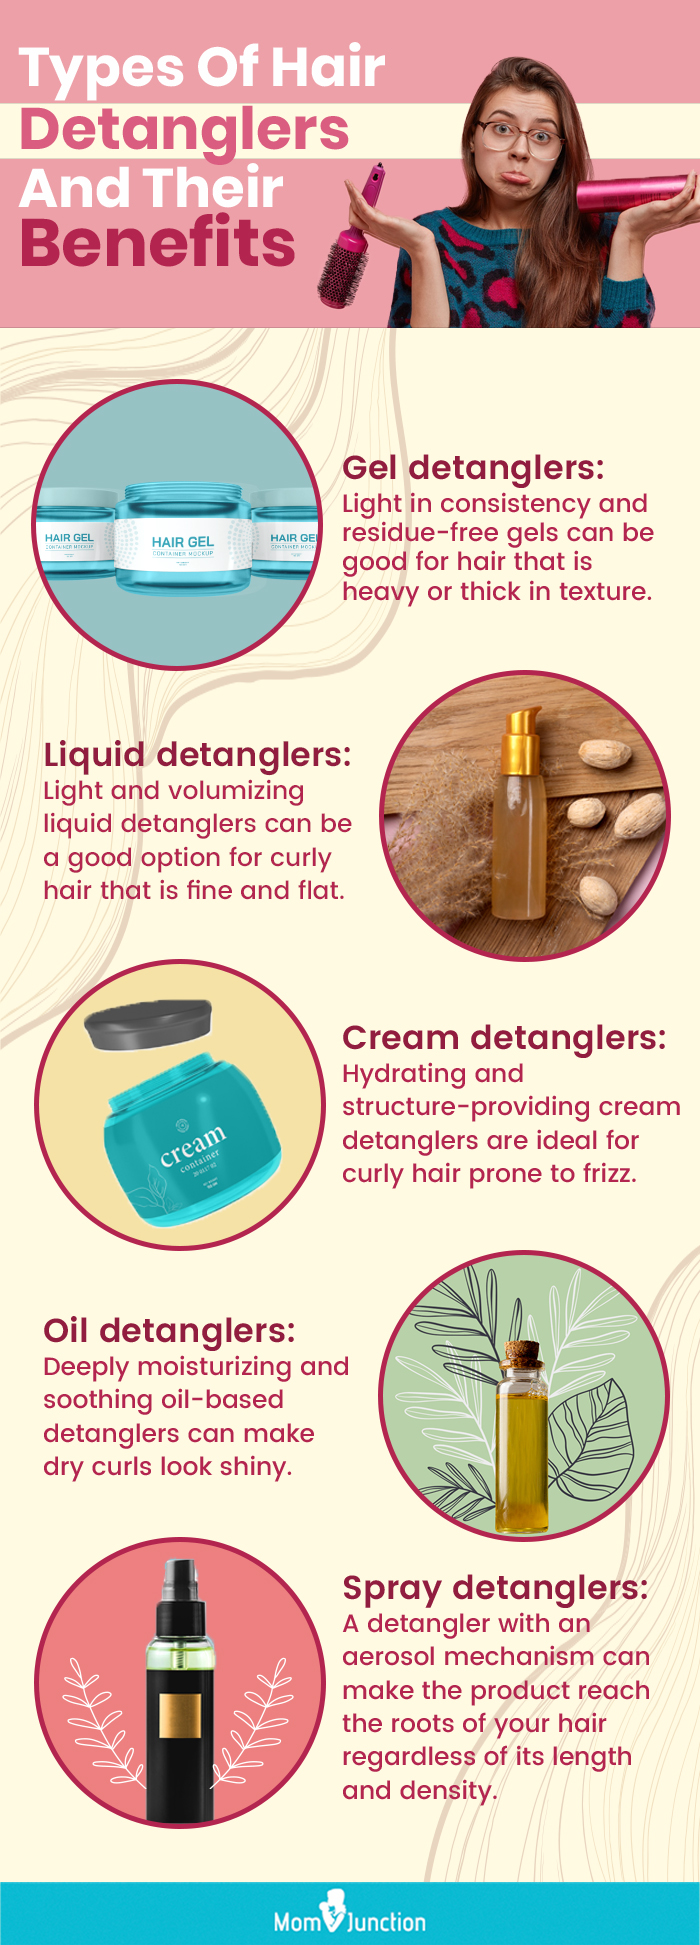 Types Of Hair Detanglers And Their Benefits (infographic)